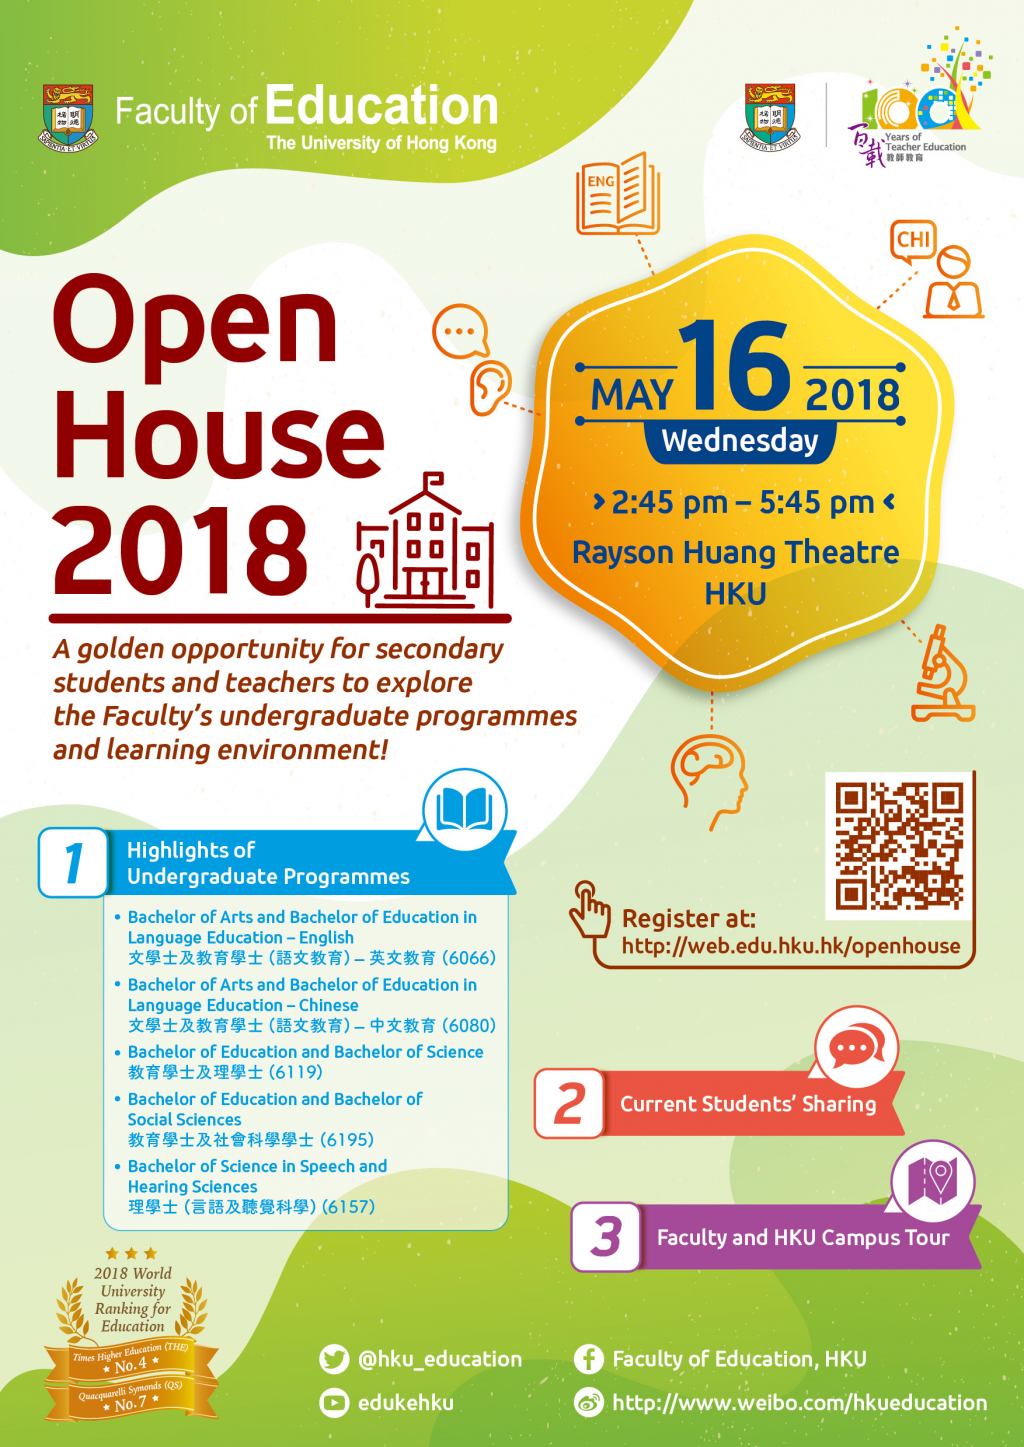 Faculty of Education - Open House 2018